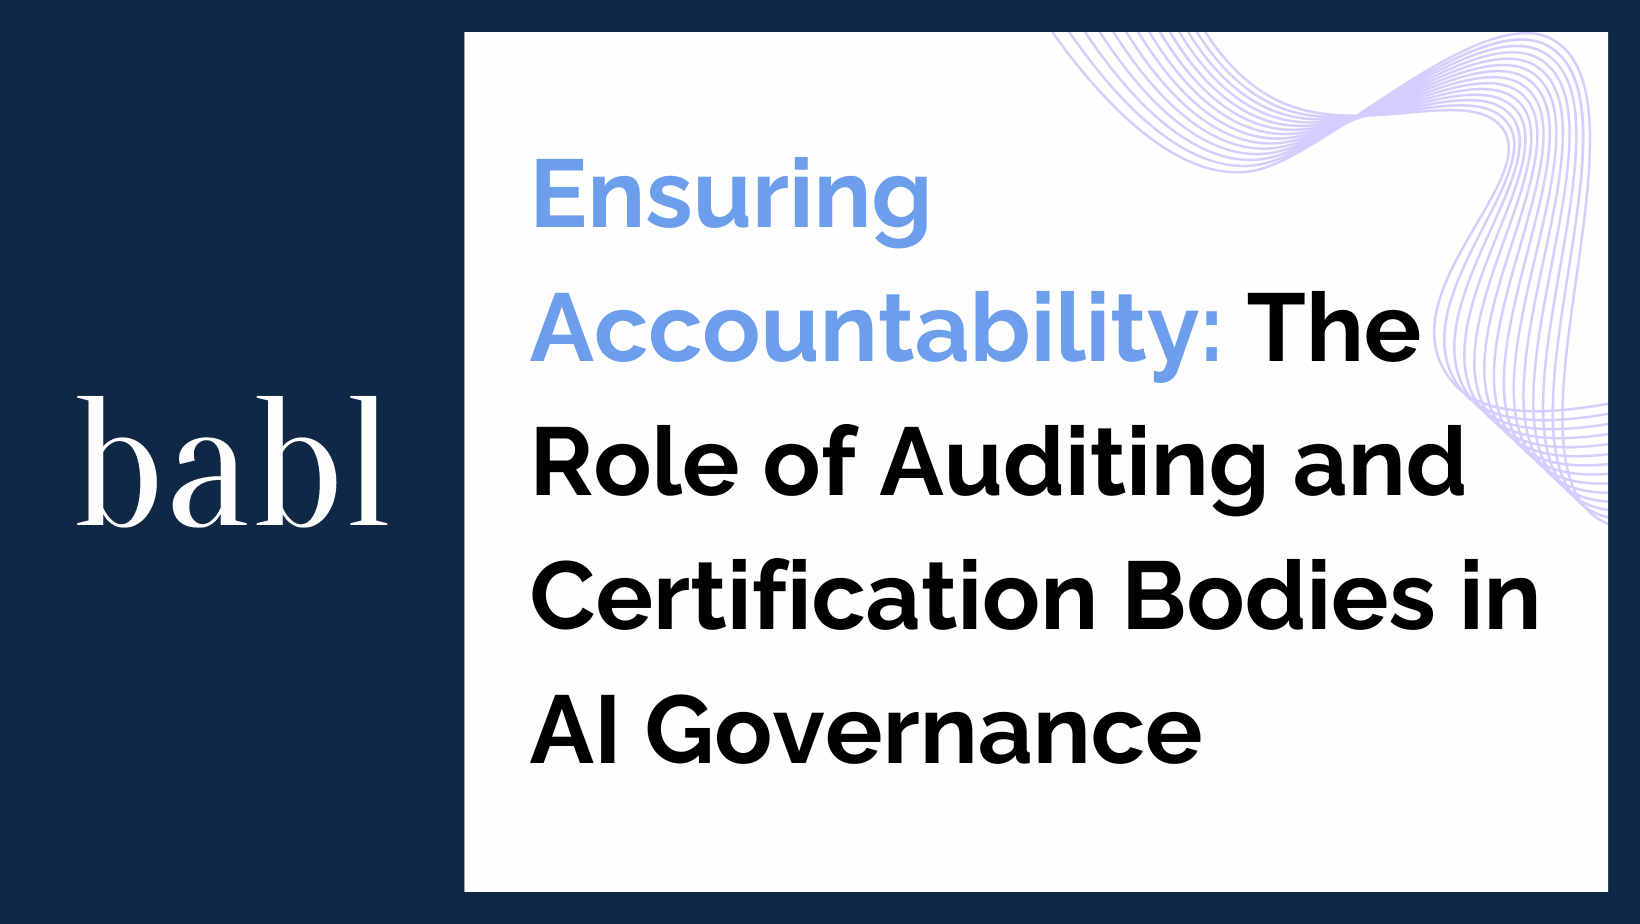 Ensuring Accountability: The Role of Auditing and Certification Bodies in AI Governance